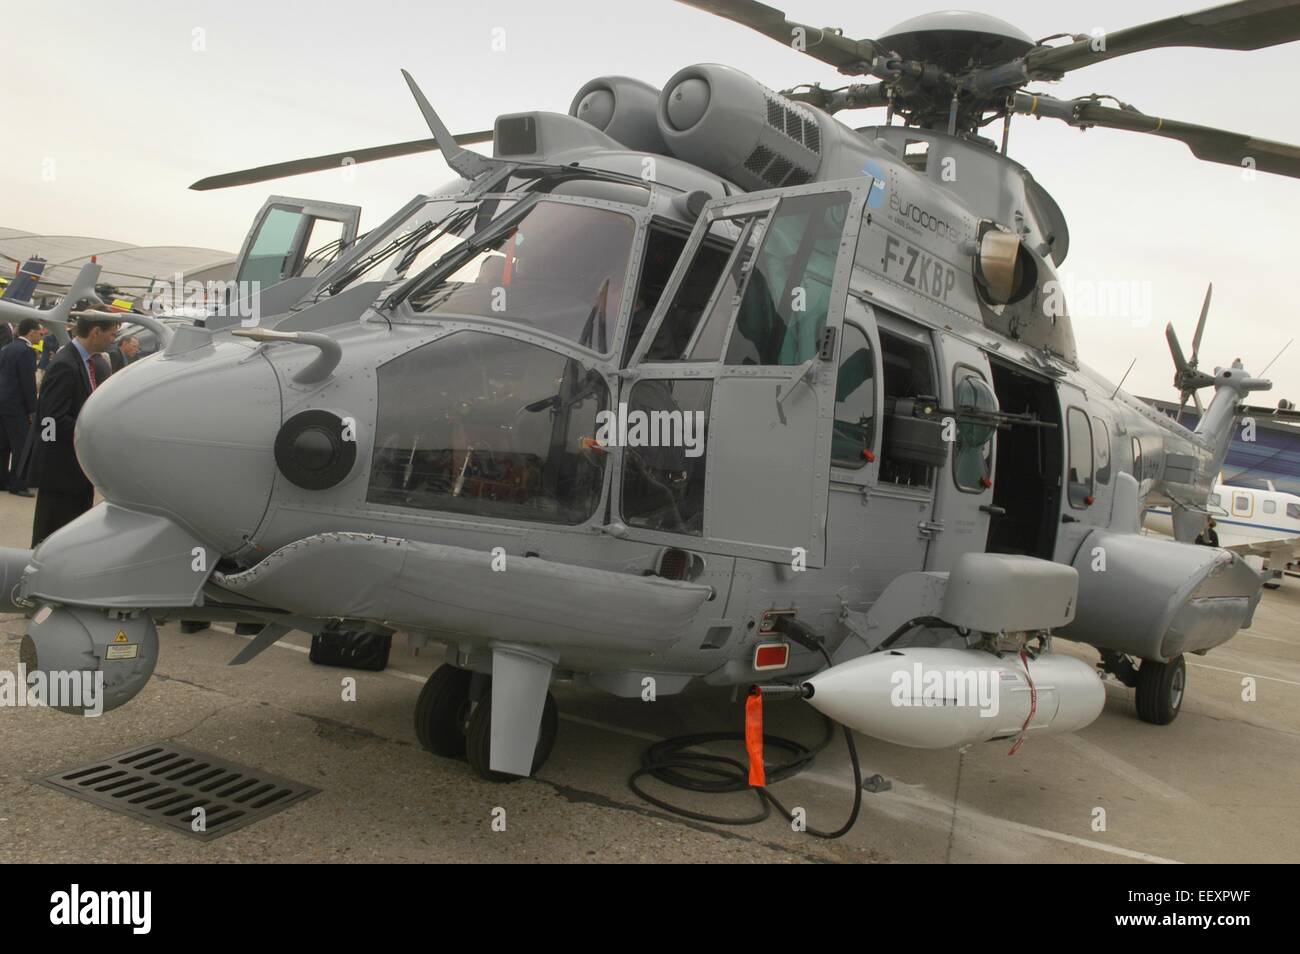 Military helicopter Eurocopter Super Puma Stock Photo - Alamy